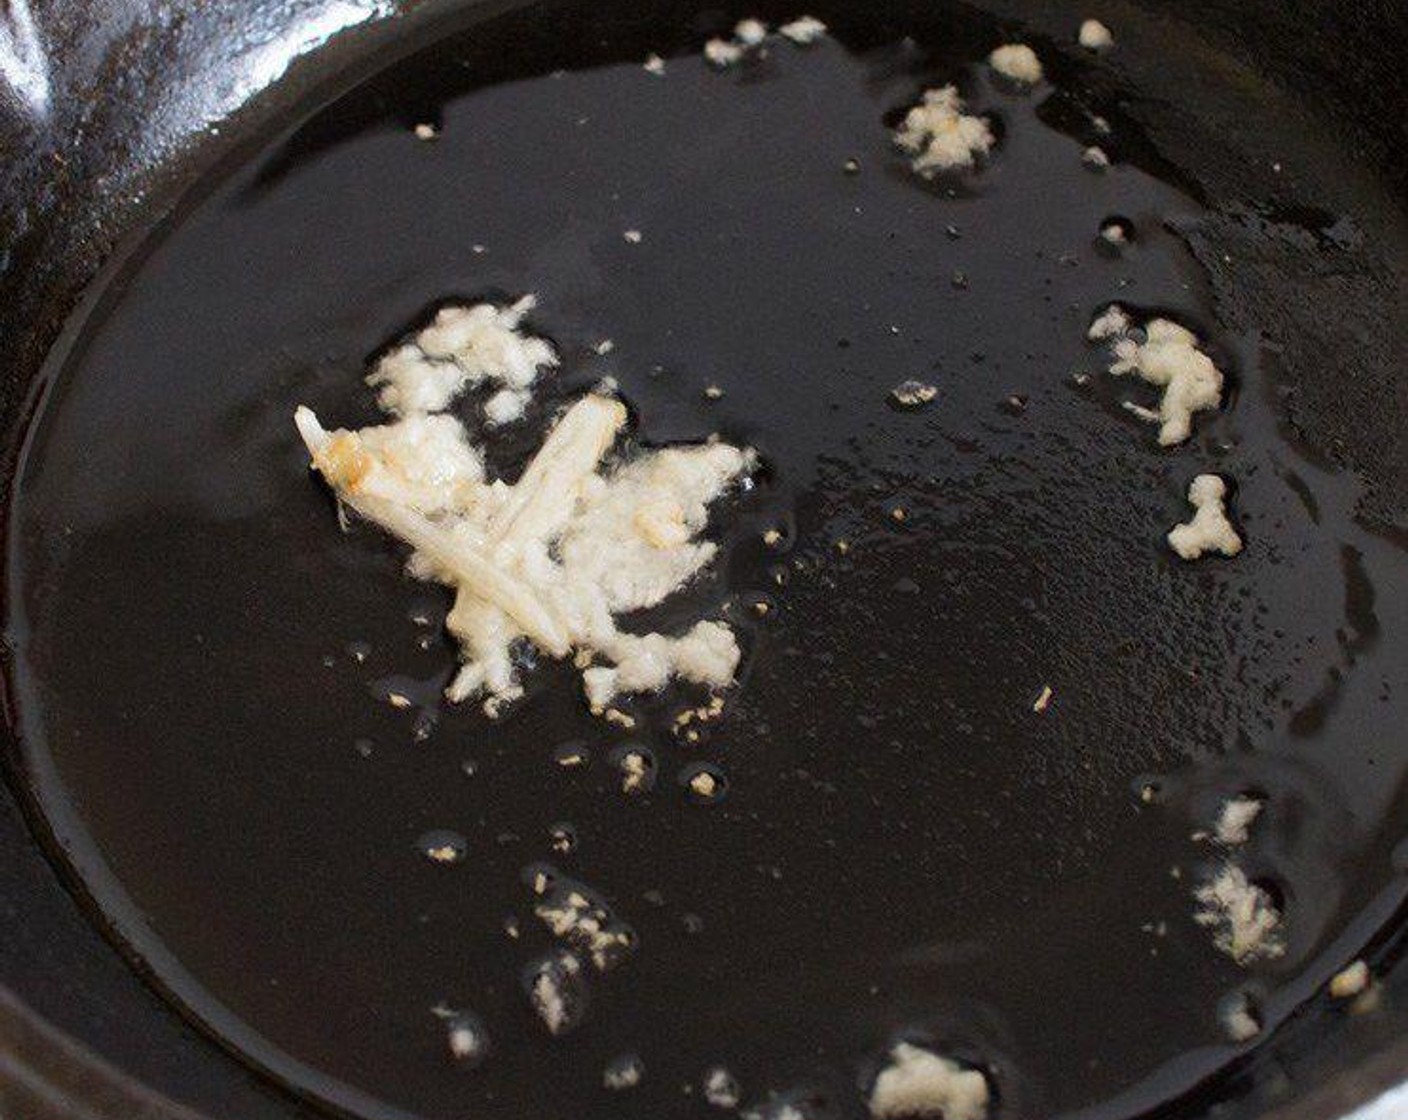 step 2 Heat a generous splash of Oil (as needed) over low heat in a large, non-stick frying pan, add the Garlic (1 clove) and fry for 2-3 minutes until the garlic turns slightly golden in color.